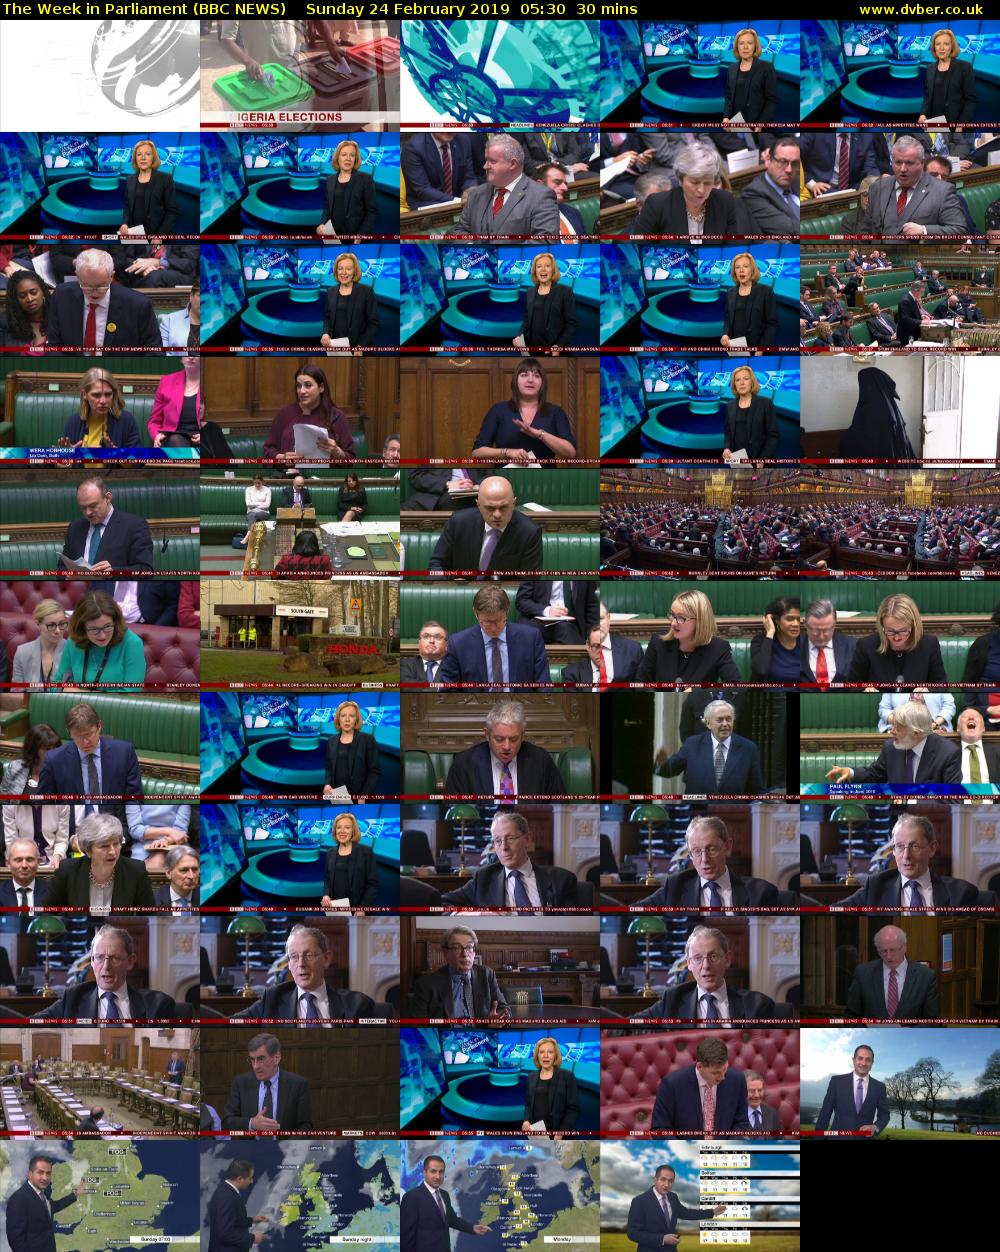 The Week in Parliament (BBC NEWS) Sunday 24 February 2019 05:30 - 06:00